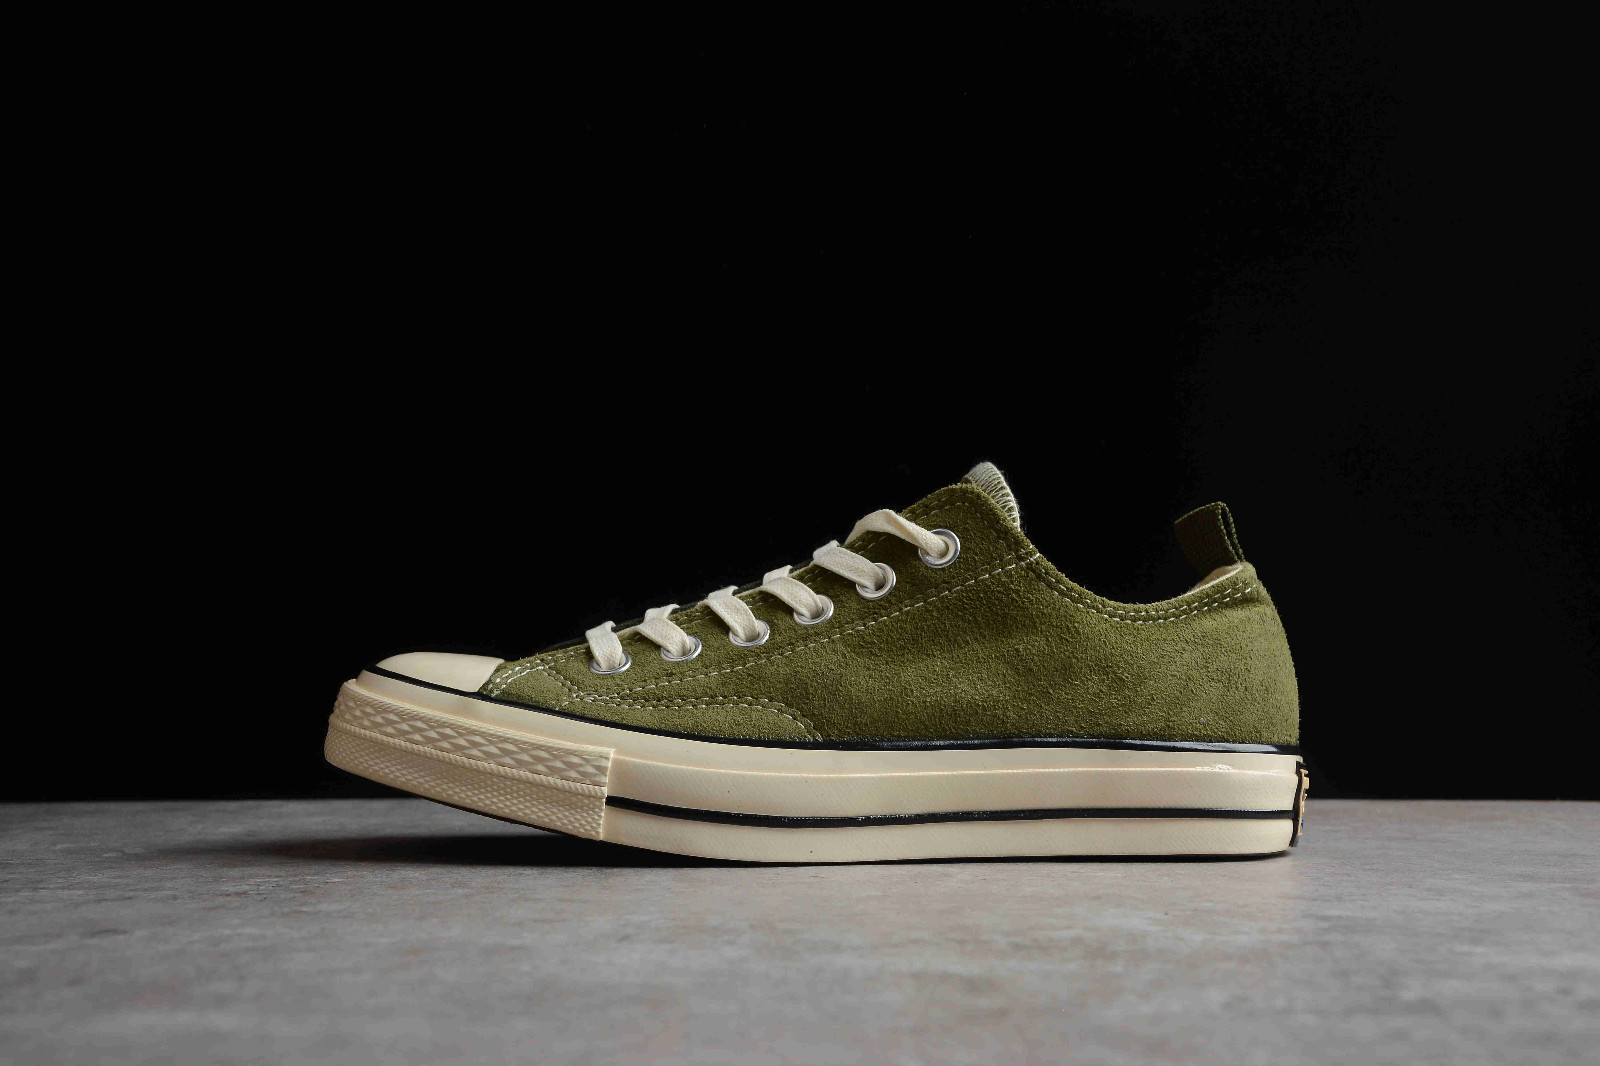 Madness x Converse Chuck Taylor All 70 Ox Army Green Suede 161026C - Converse Chuck 70 Utility Women's - StclaircomoShops